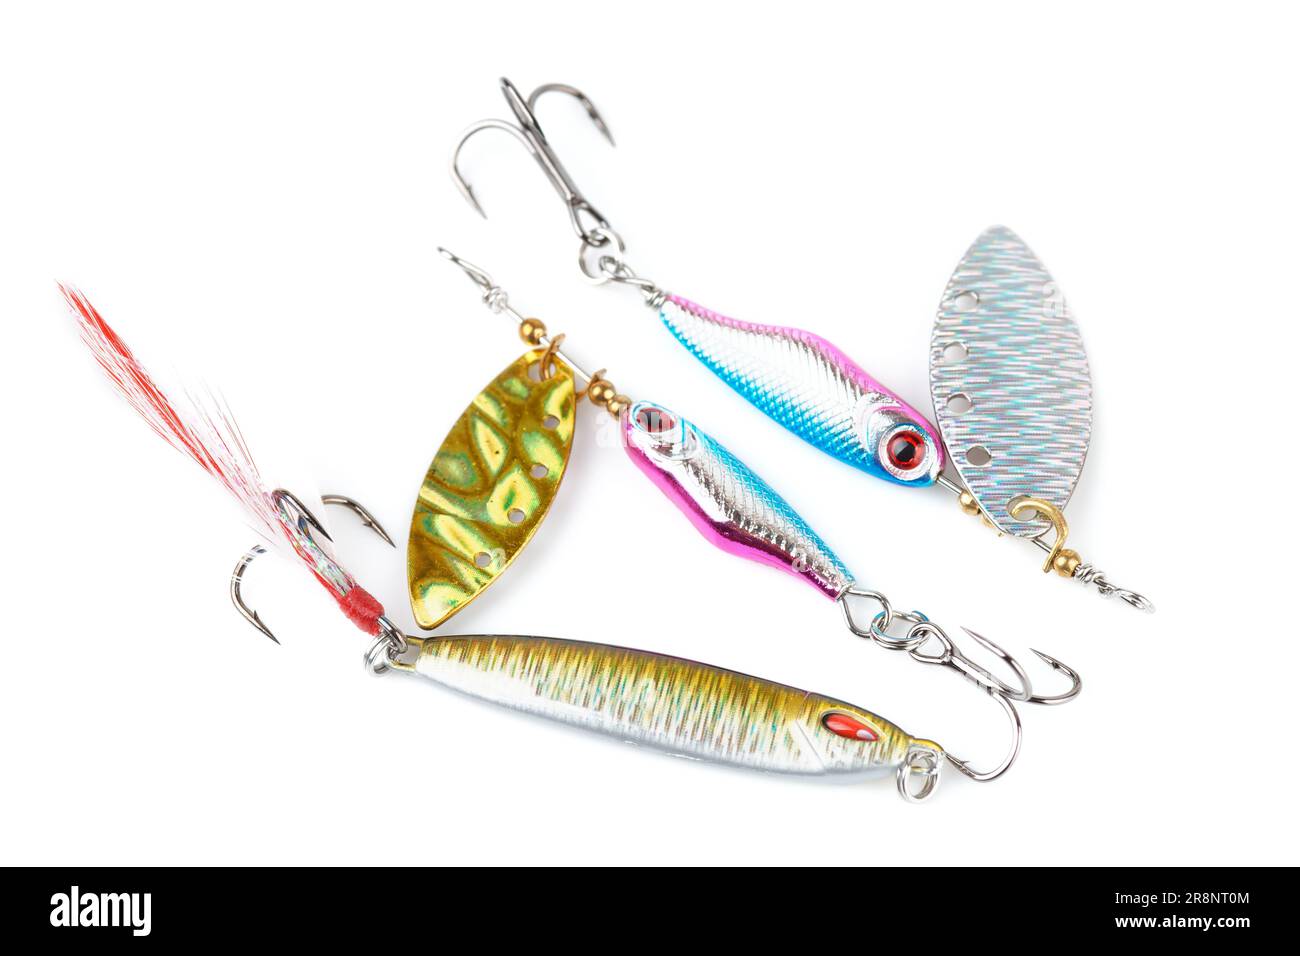 Set of metal lures for fishing shot on white surface Stock Photo - Alamy